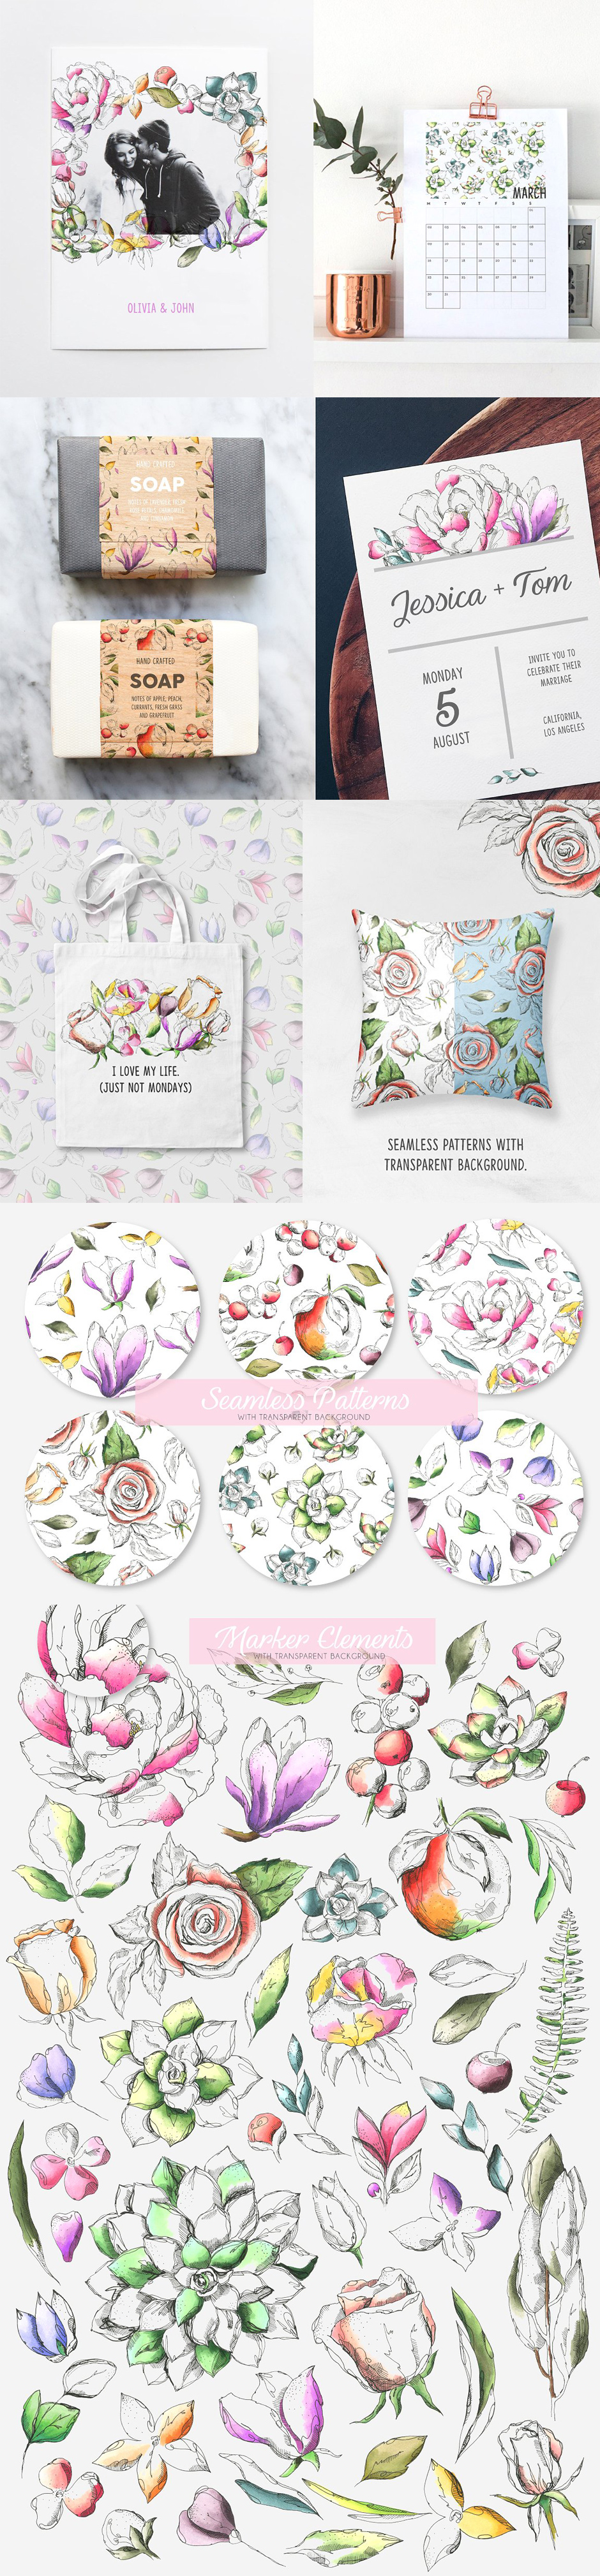 flower images and floral patterns